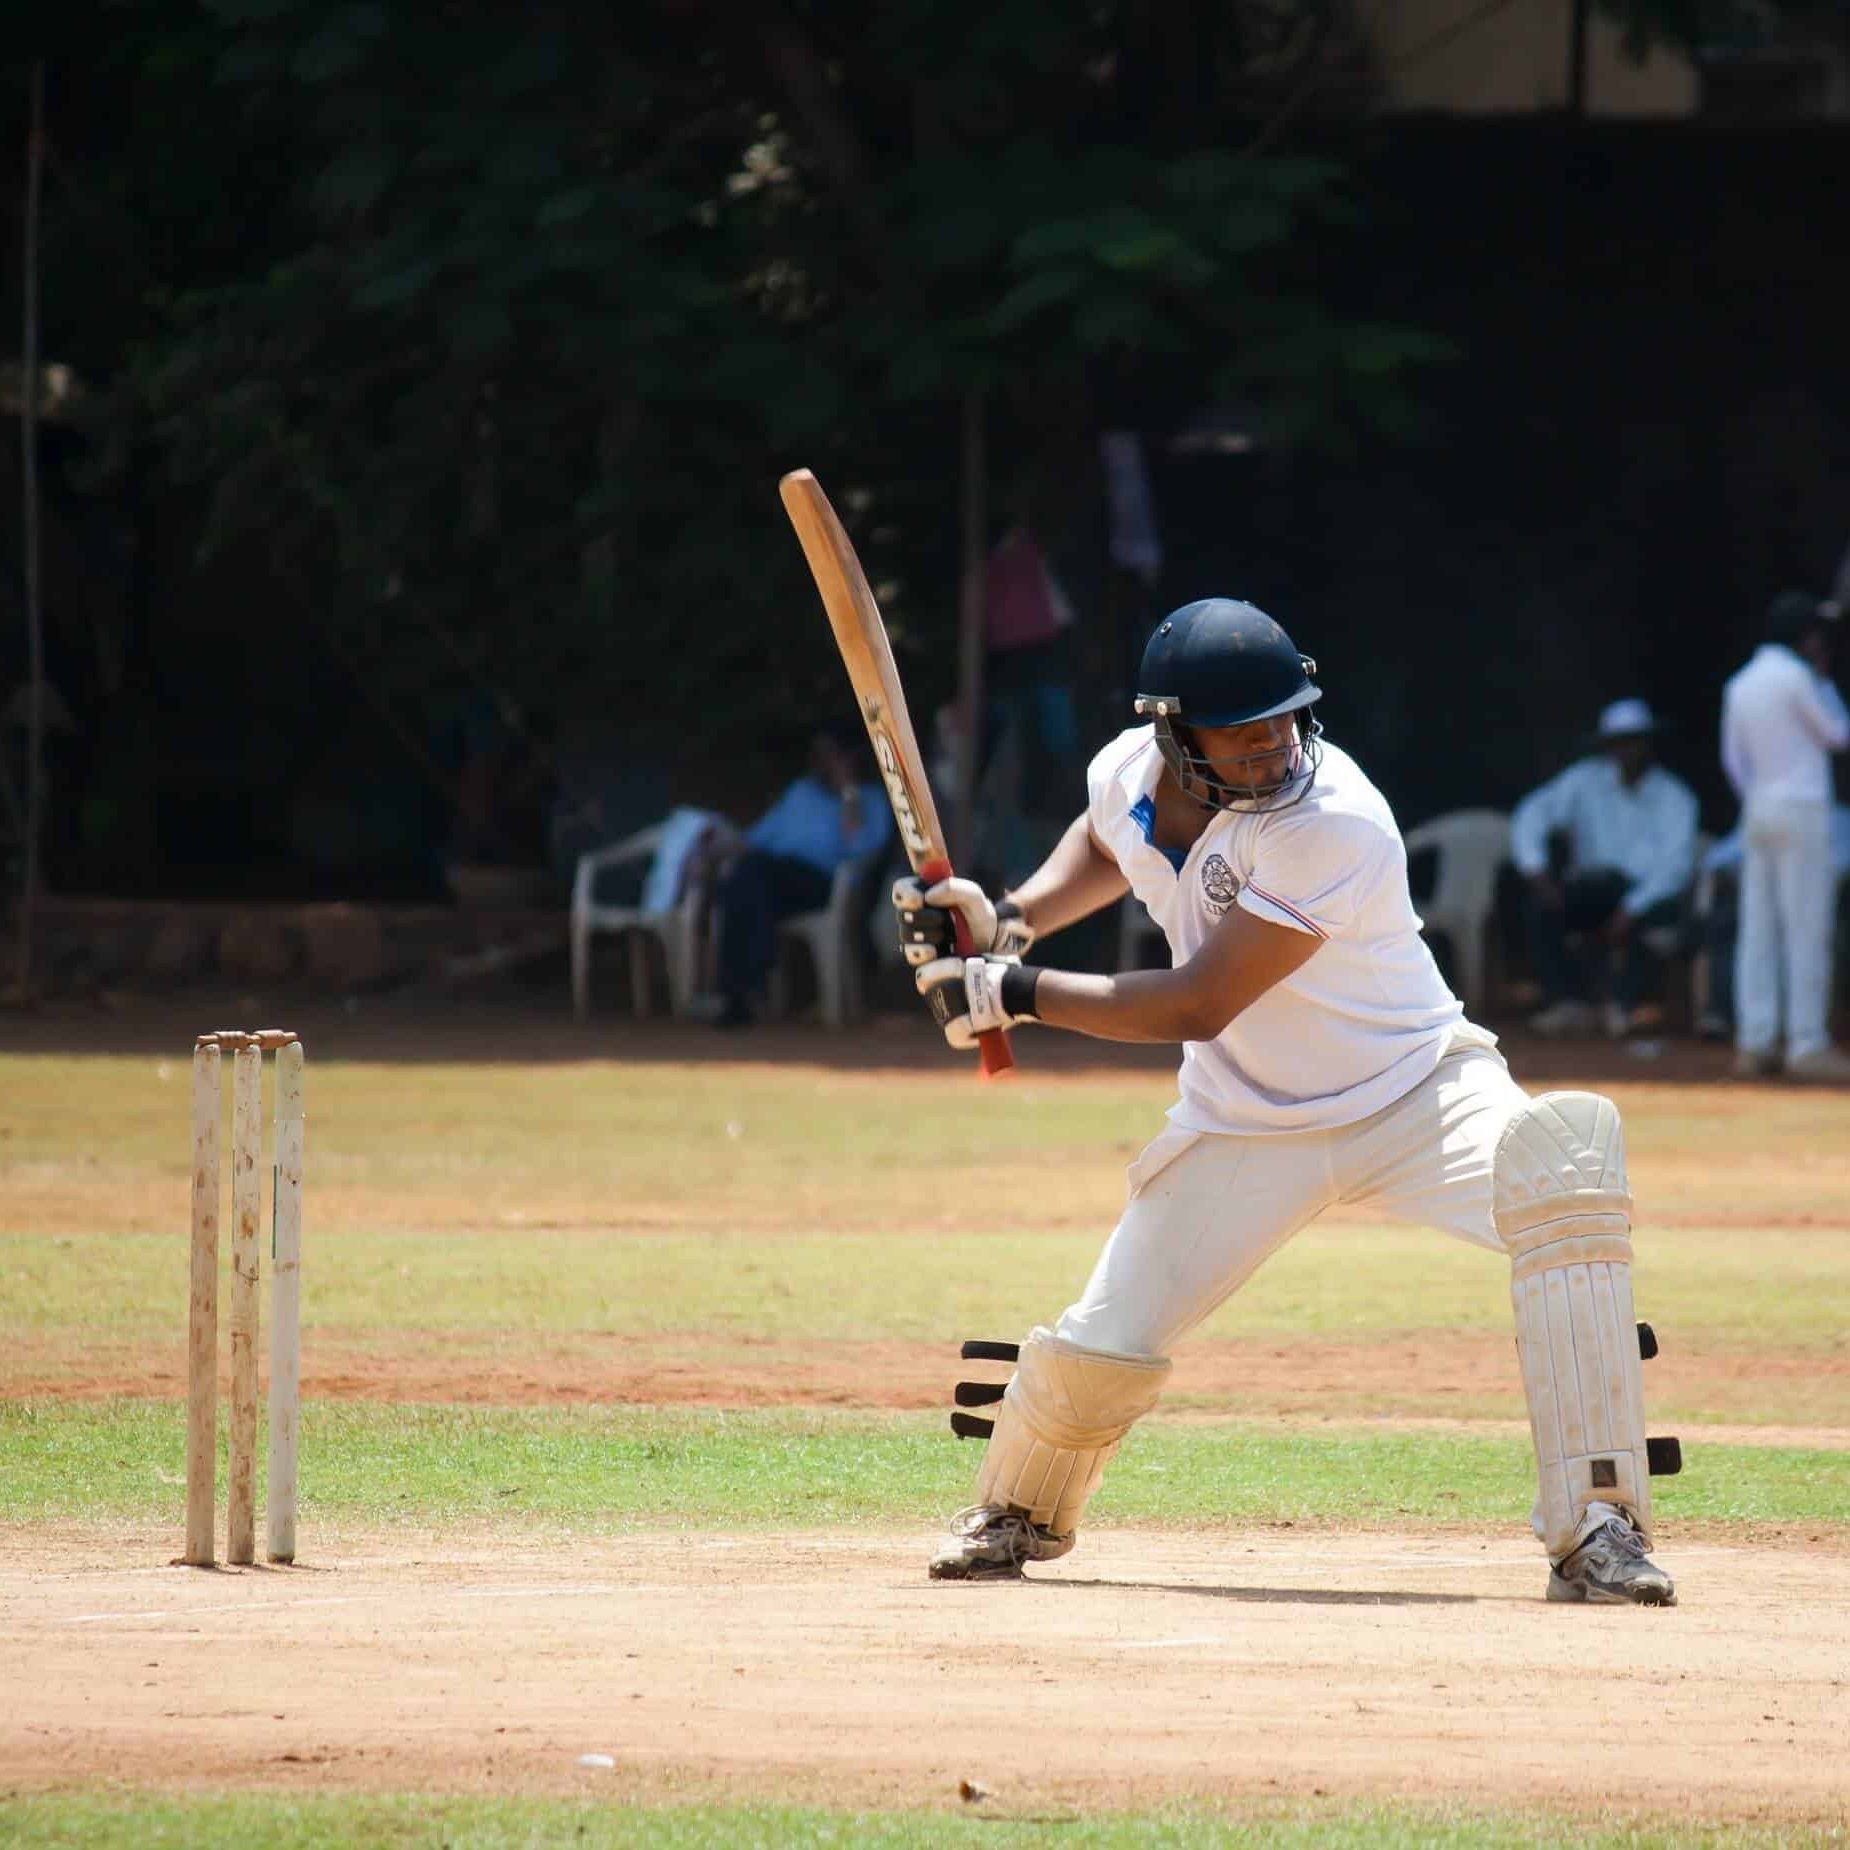 A Cricket Player in position